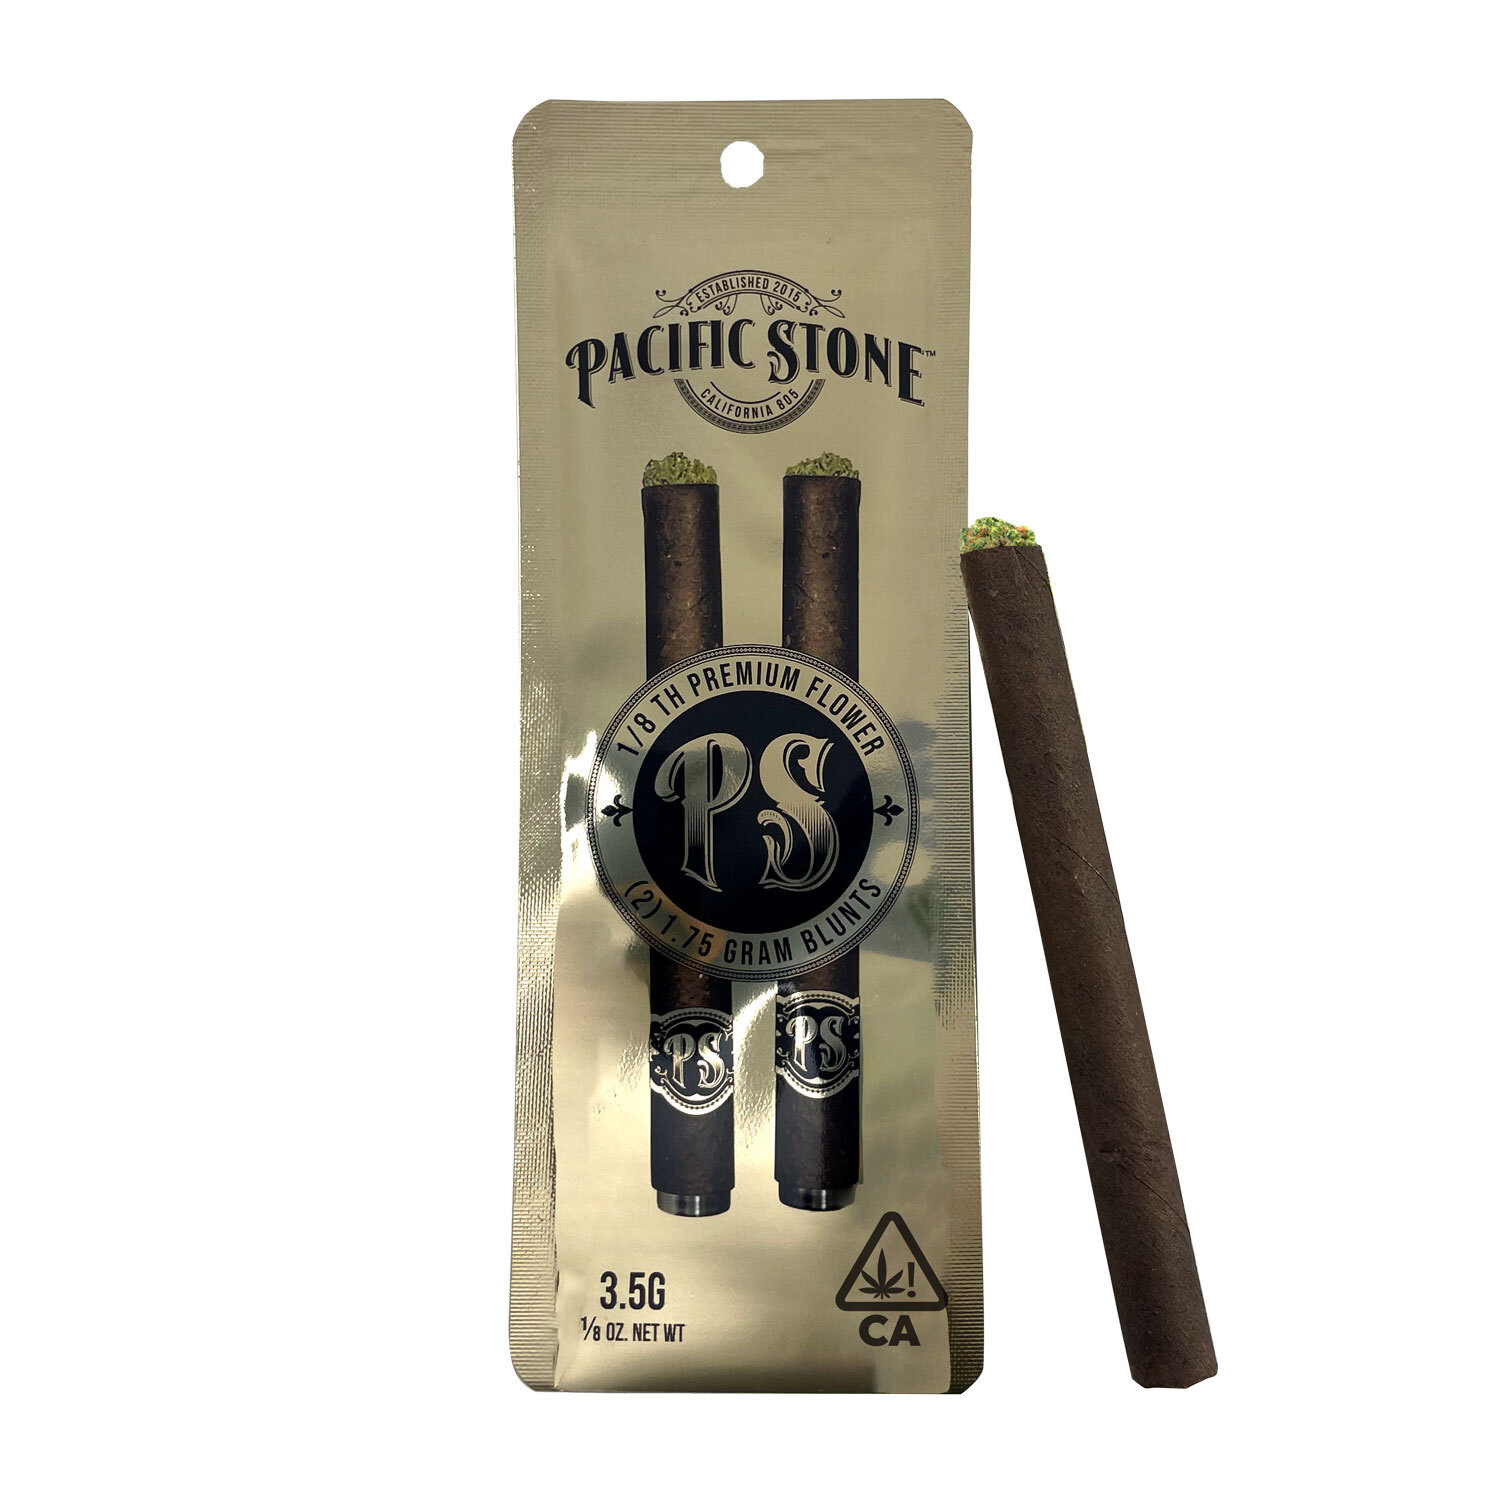 A photograph of Pacific Stone Blunt 1.75g Sativa Blue Dream 2-Pack 3.5g